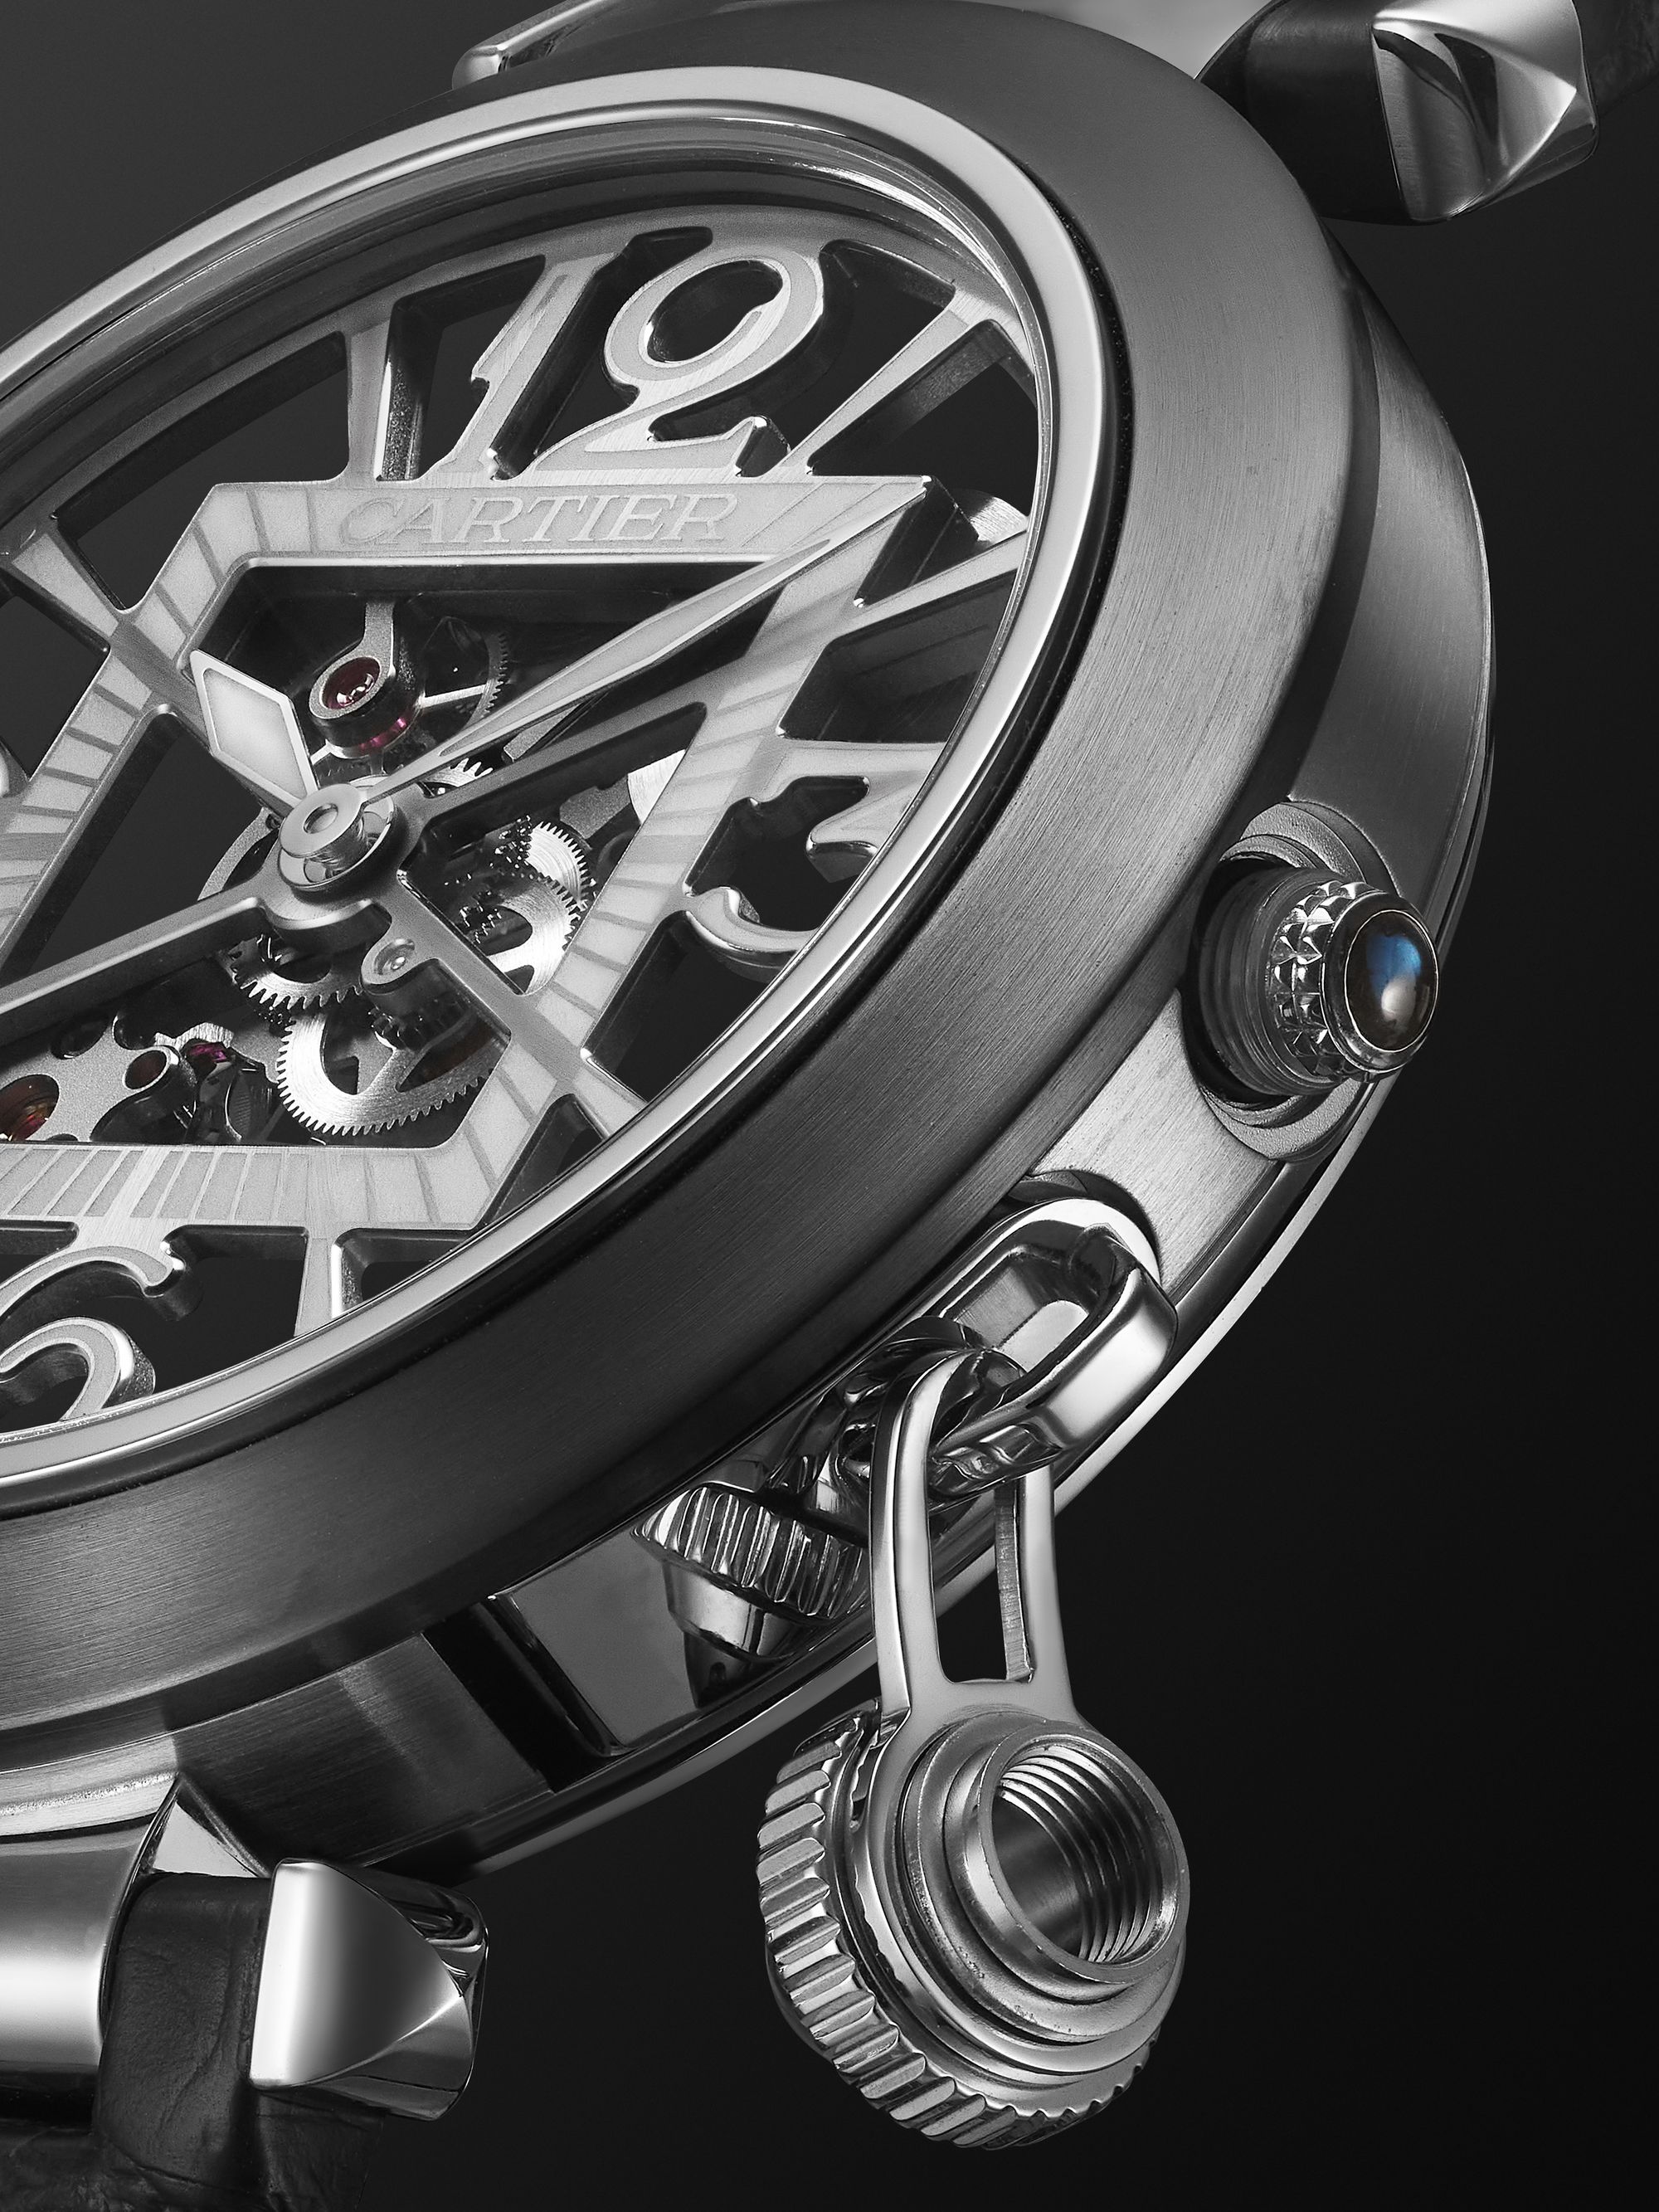 CARTIER Pasha de Cartier Automatic Skeleton 41mm Steel and Alligator Watch, Ref. No. WHPA0017